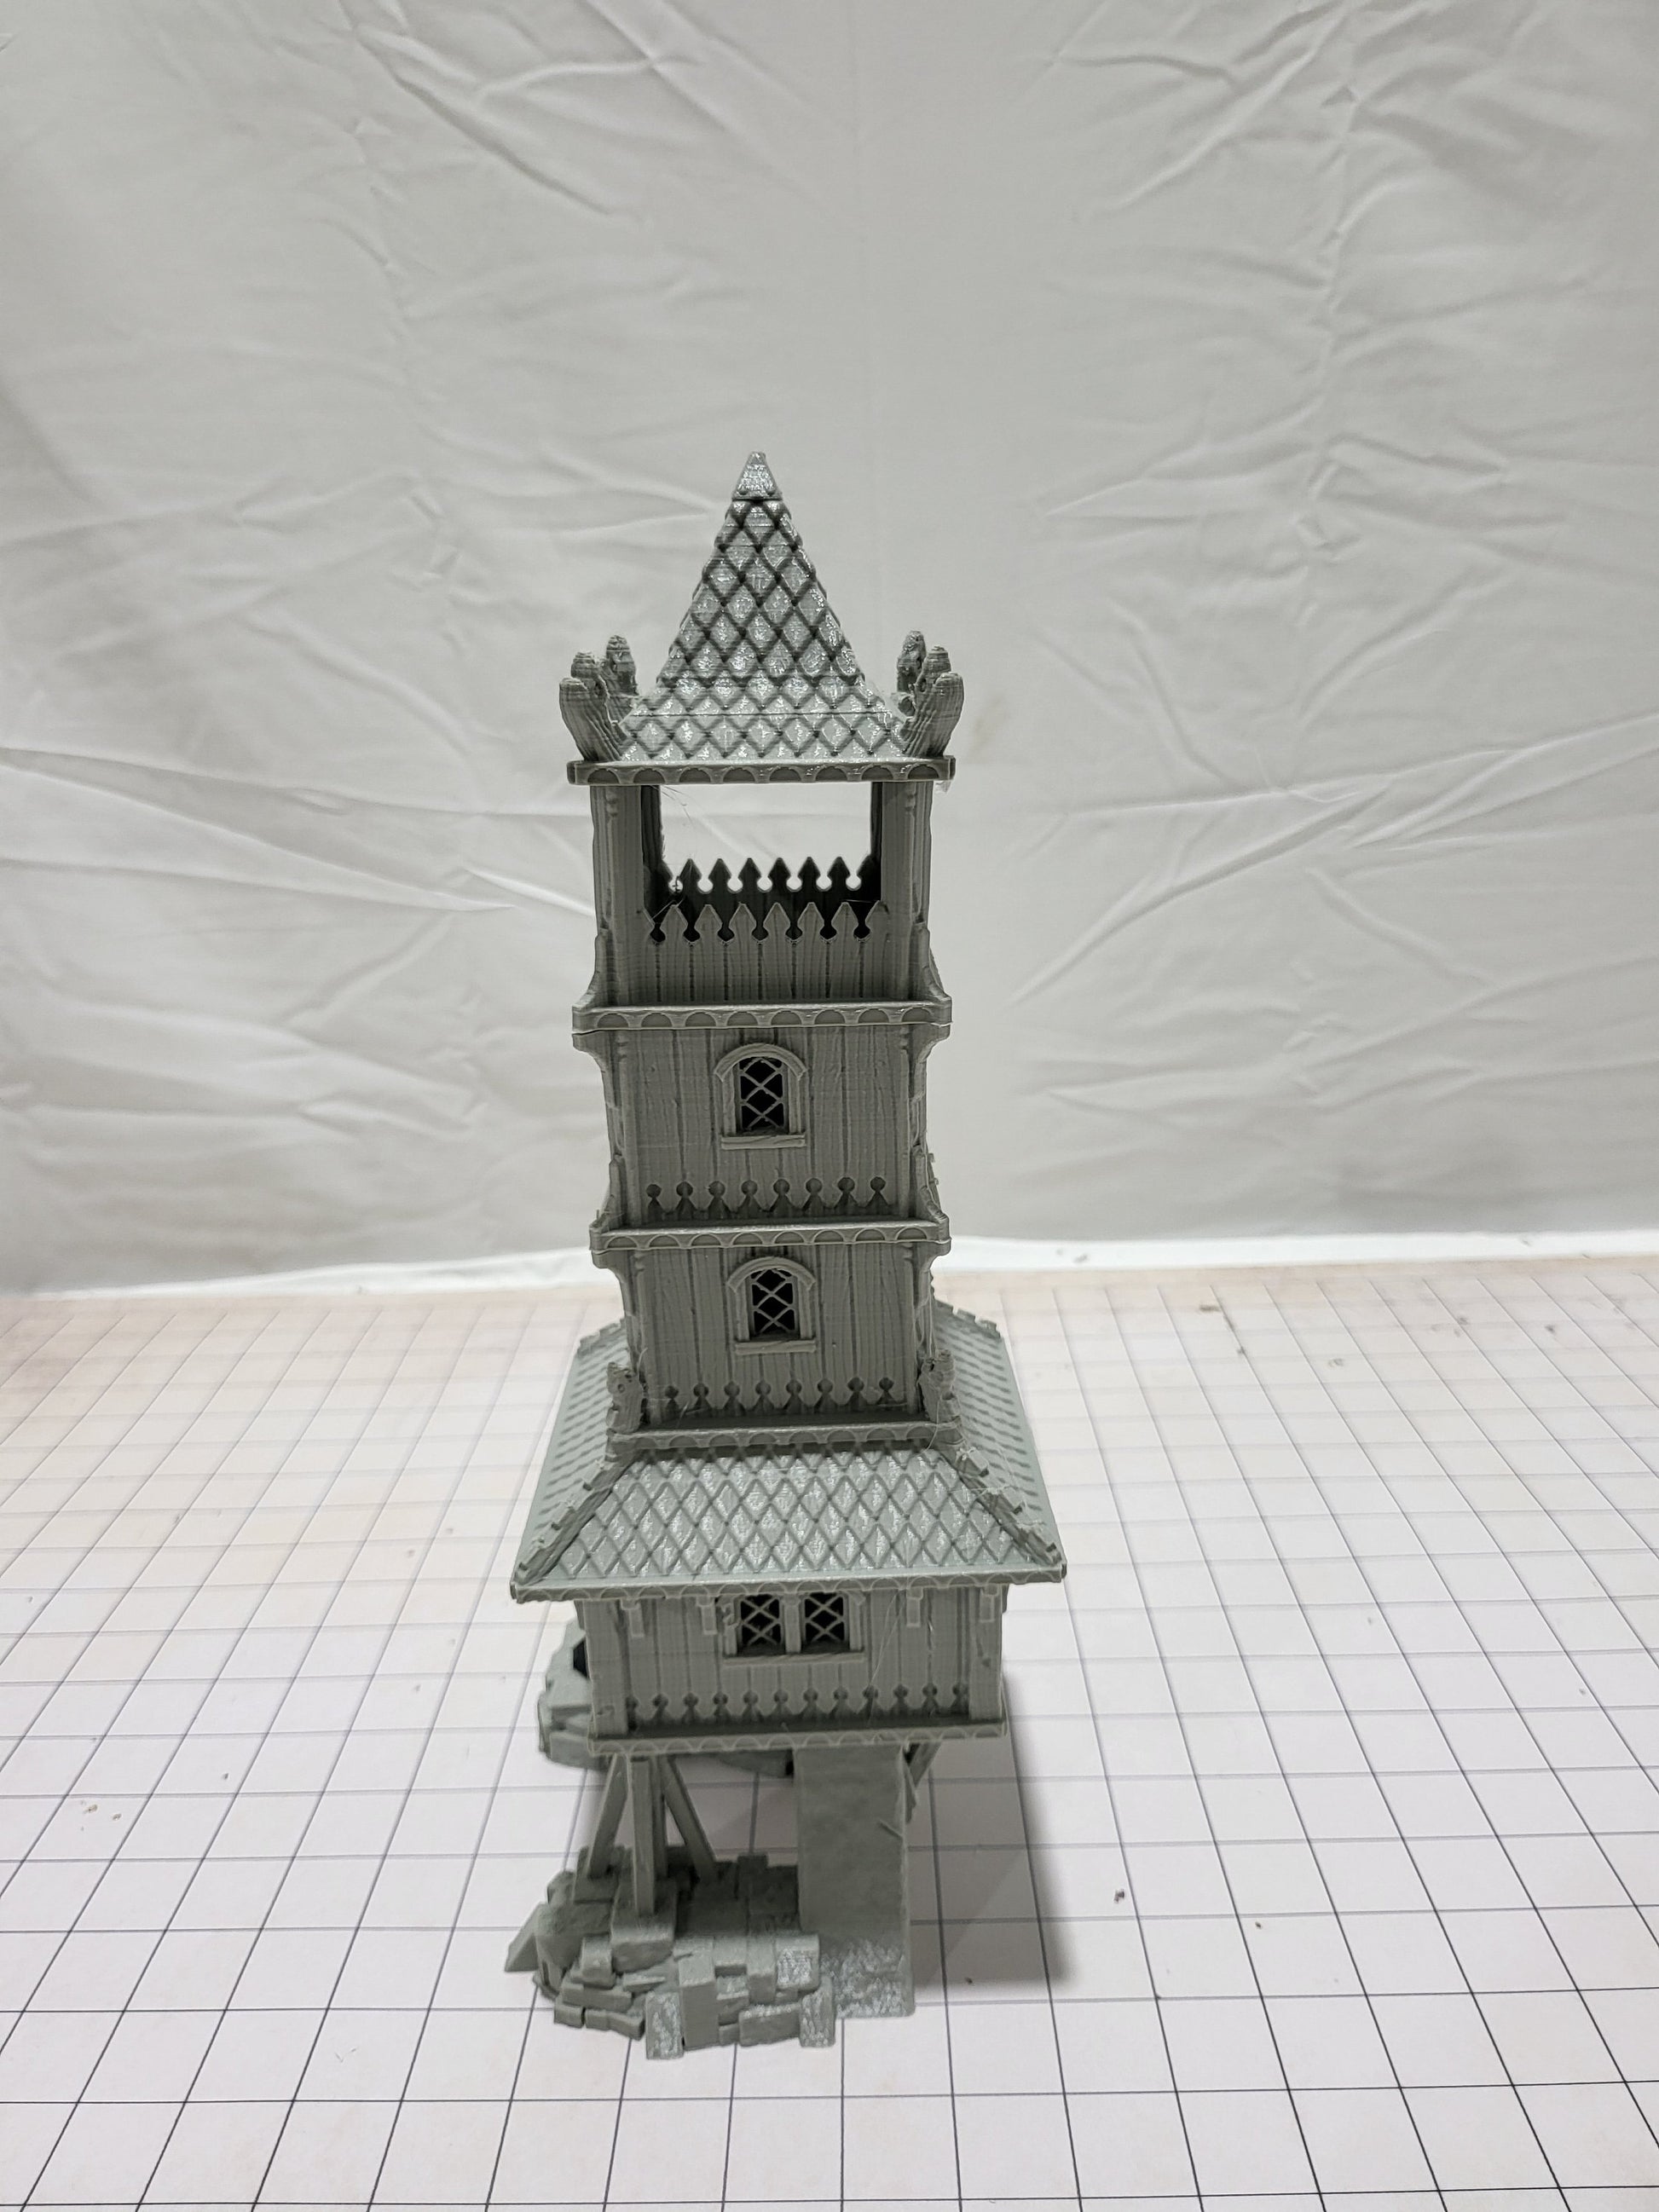 Lake District Tower House - Dungeons and Dragons - 15mm Terrain - Warhammer Terrain